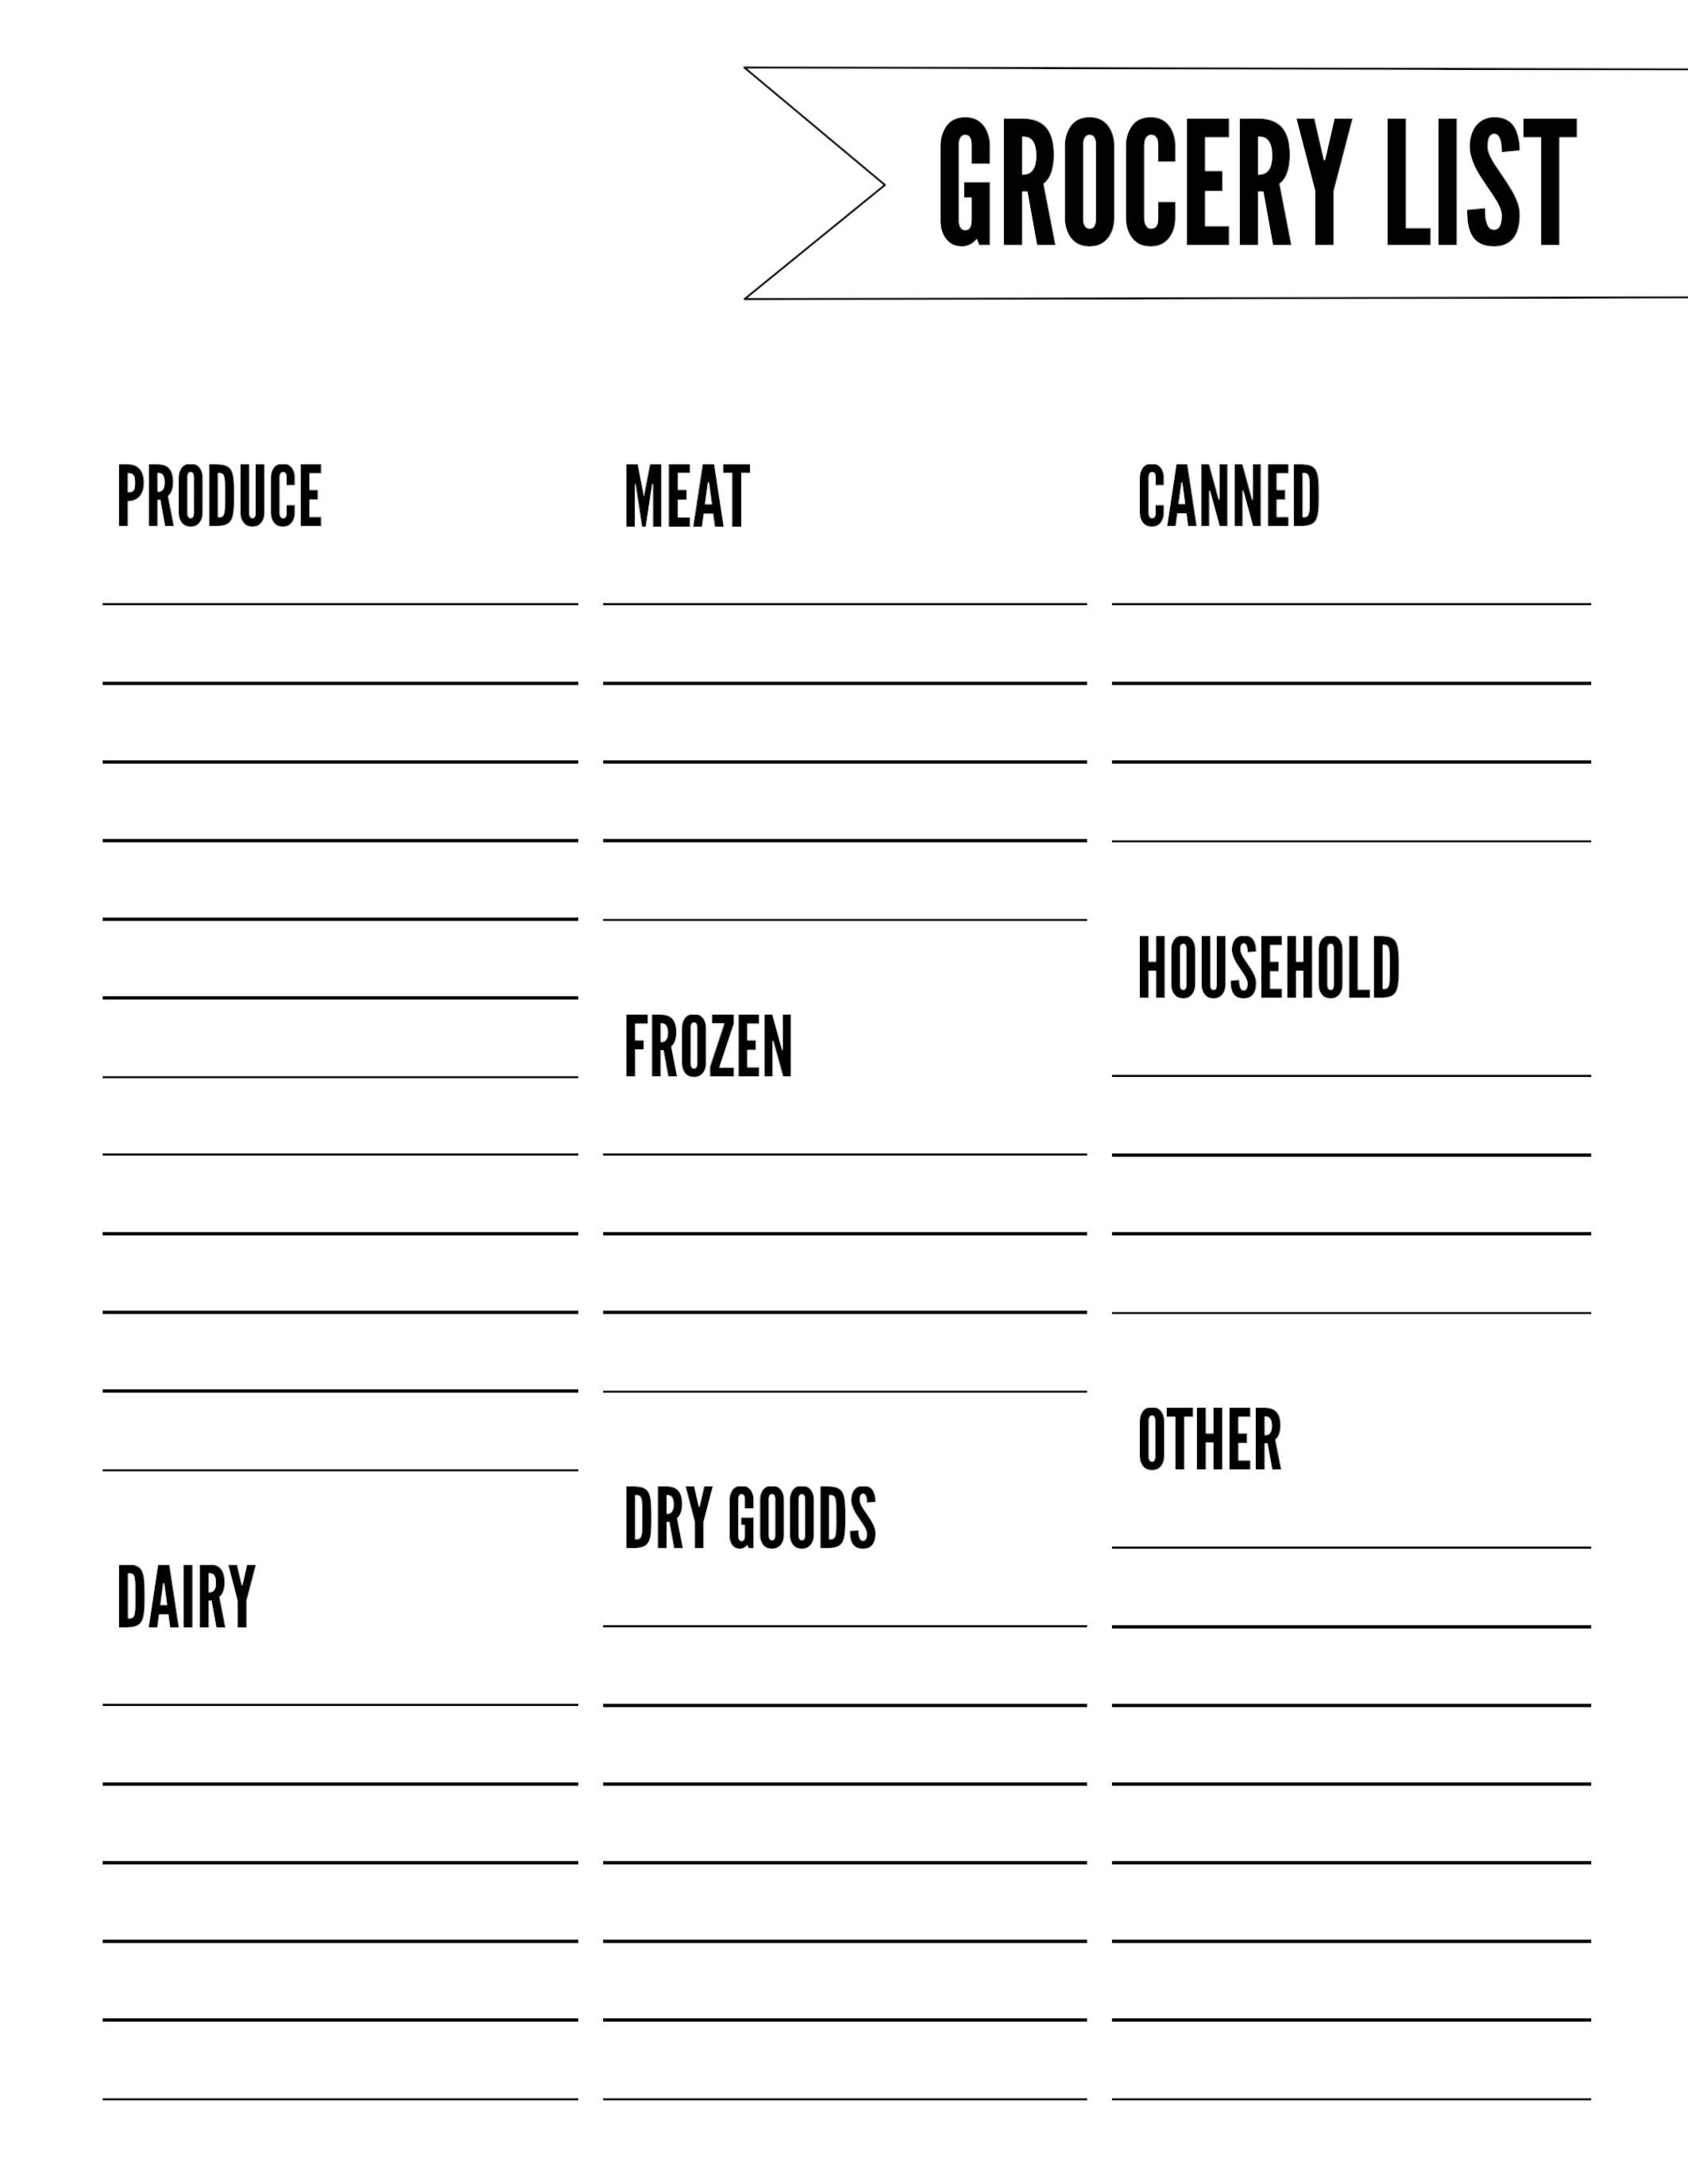 Free Printable Grocery List Template - Paper Trail Design - Free Printable Grocery List